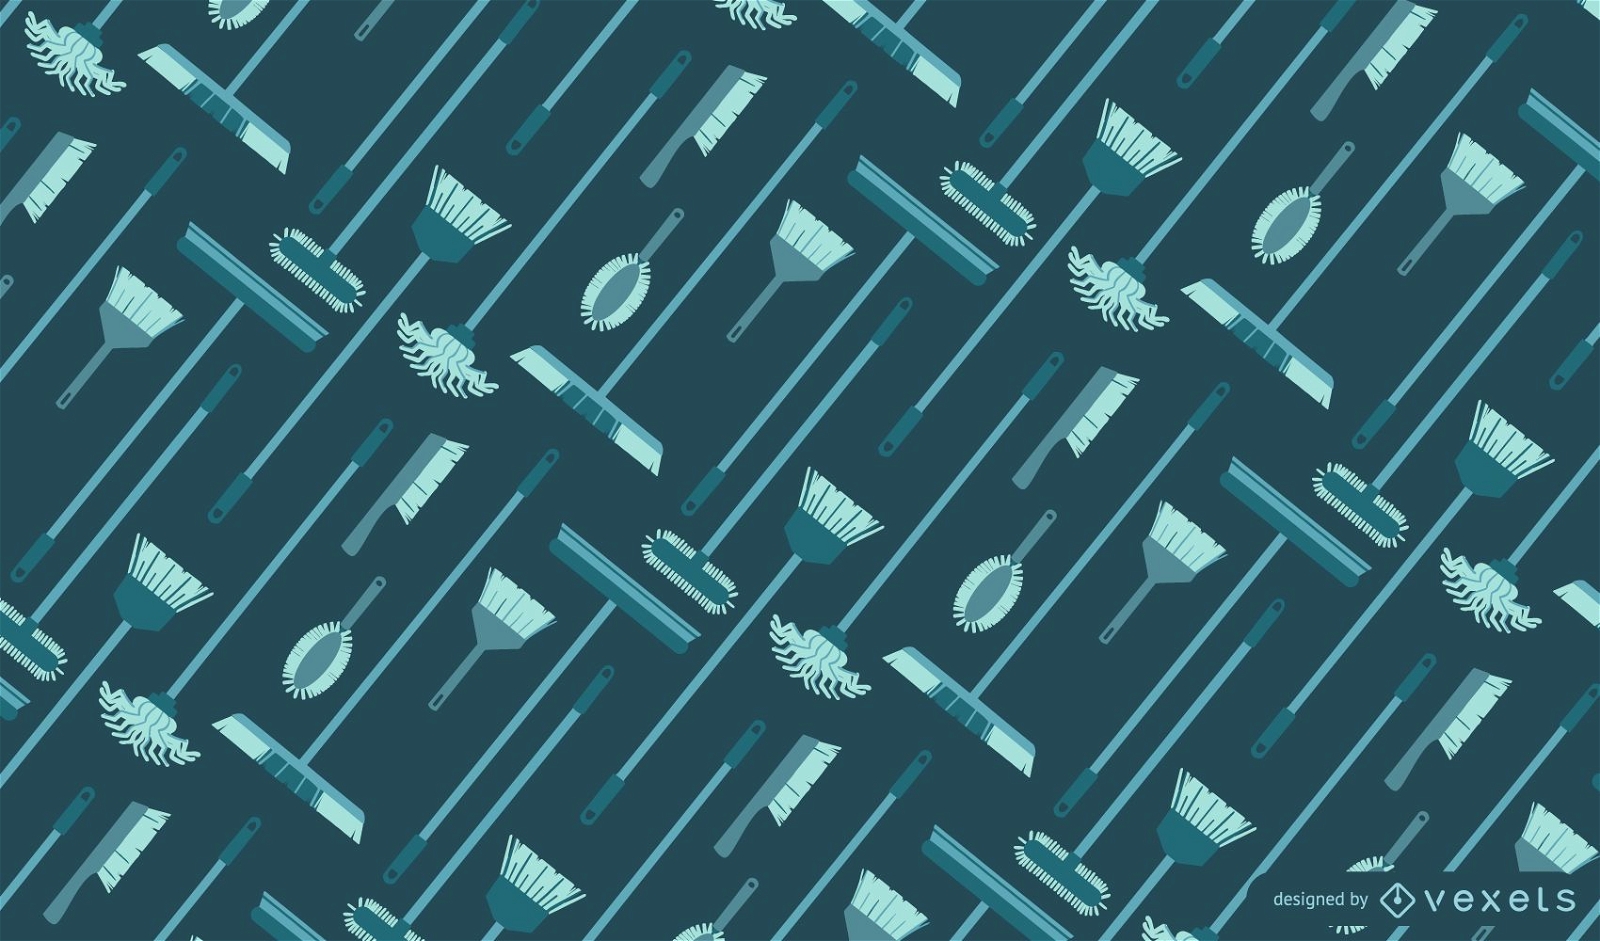 Cleaning brooms pattern design